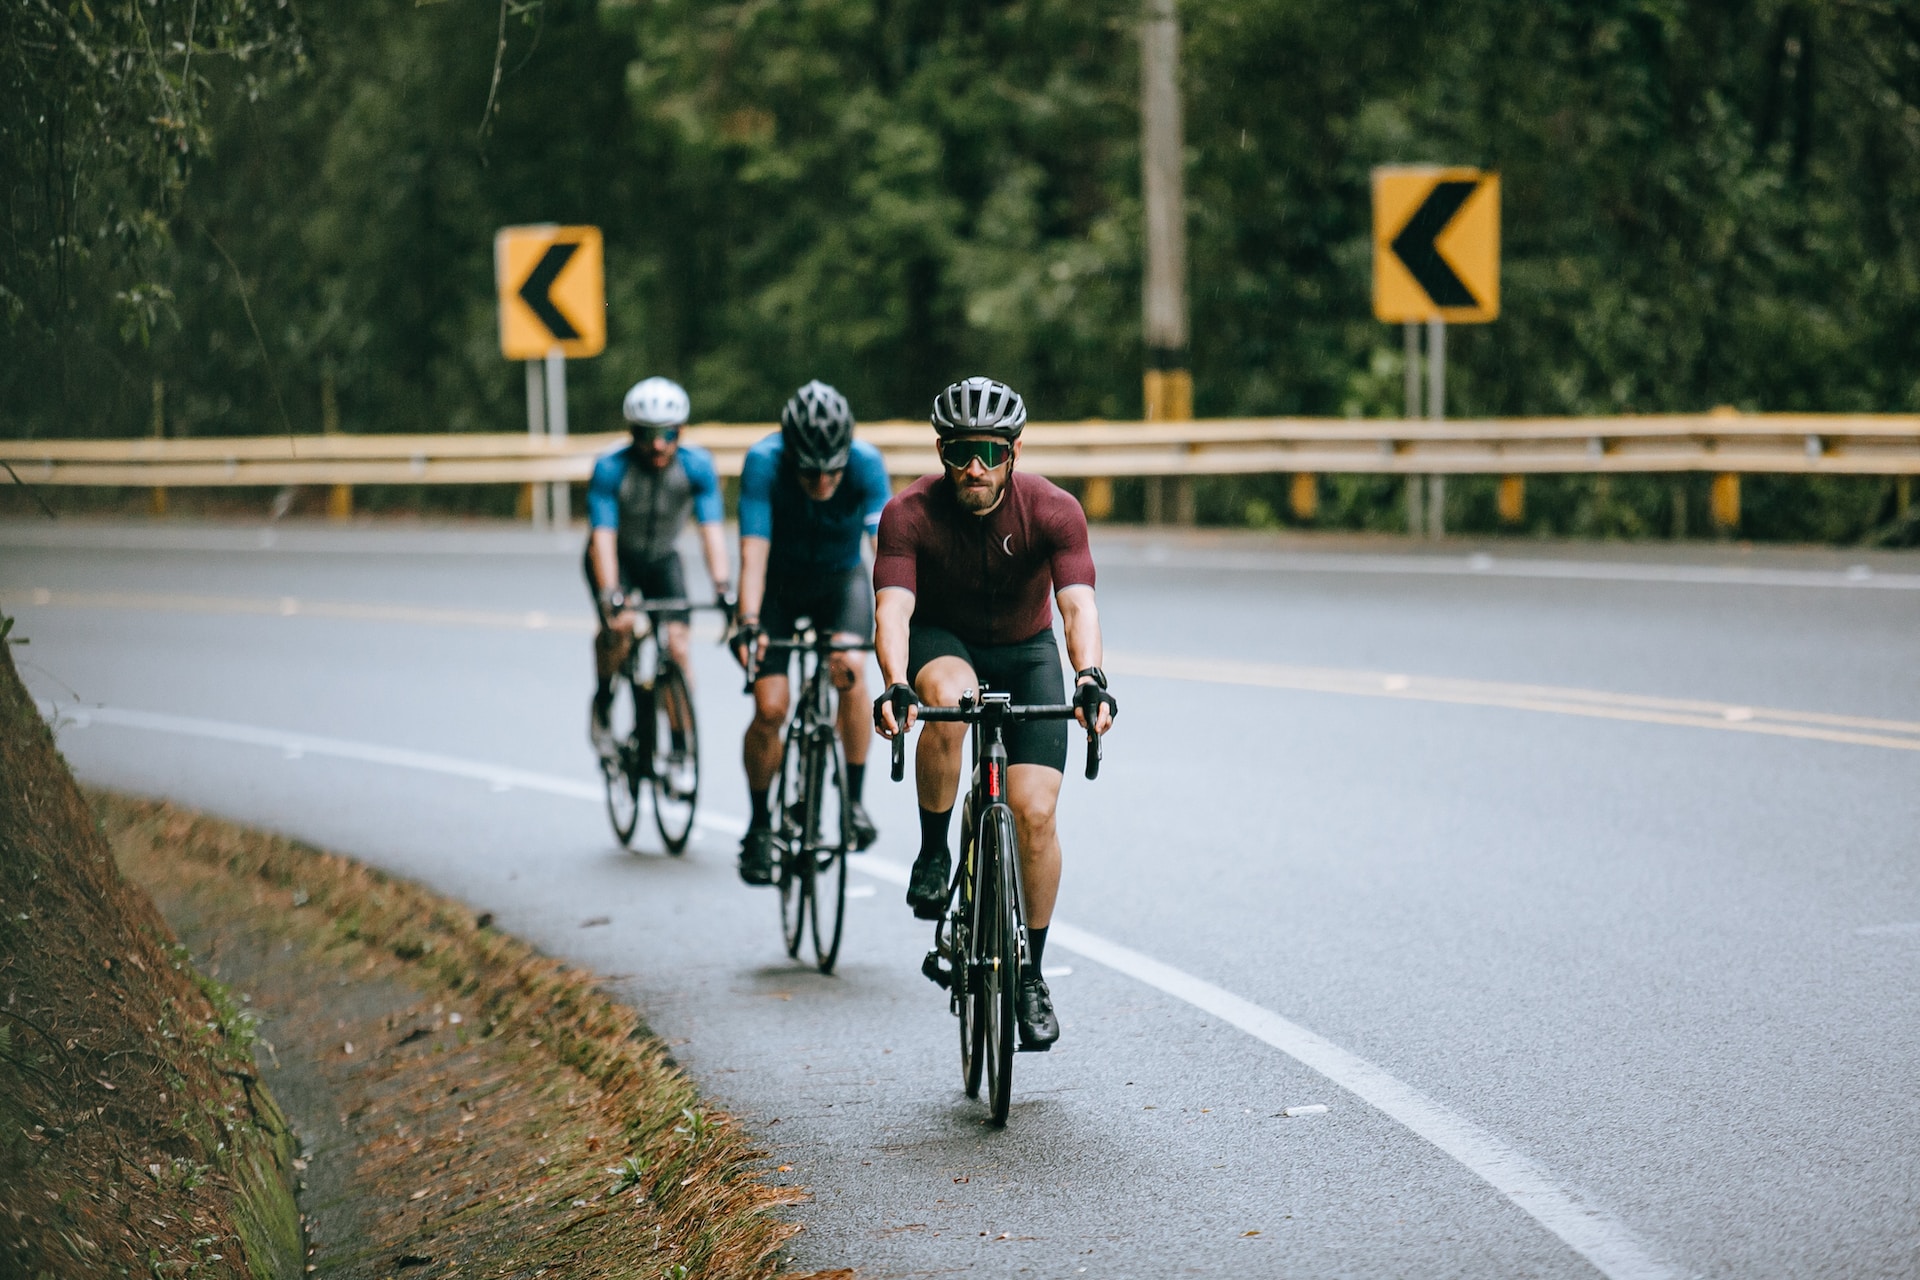 the image shows three athletes doing a cycling triathlon on the highway